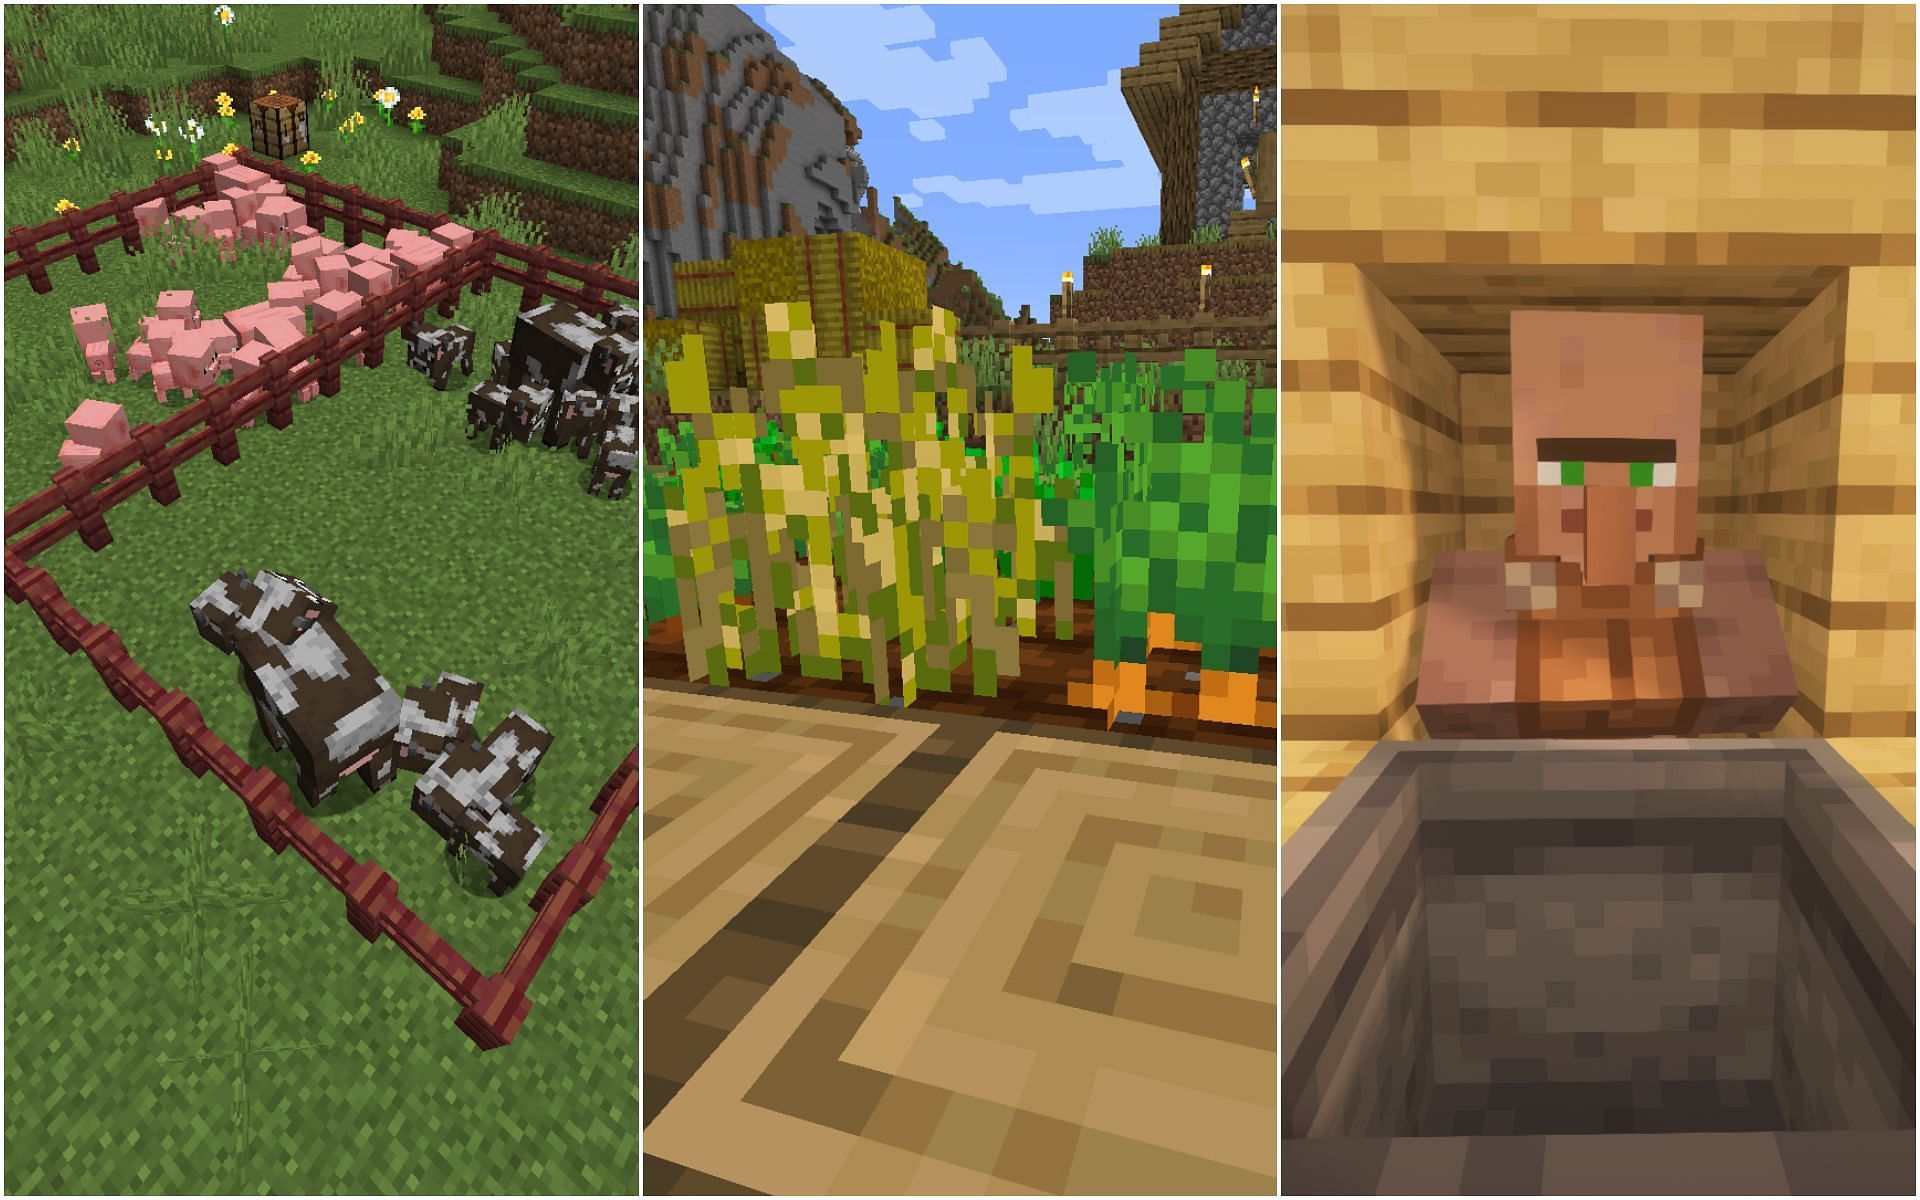 Some of the essential areas to build in the game (Image via Minecraft 1.19 update)